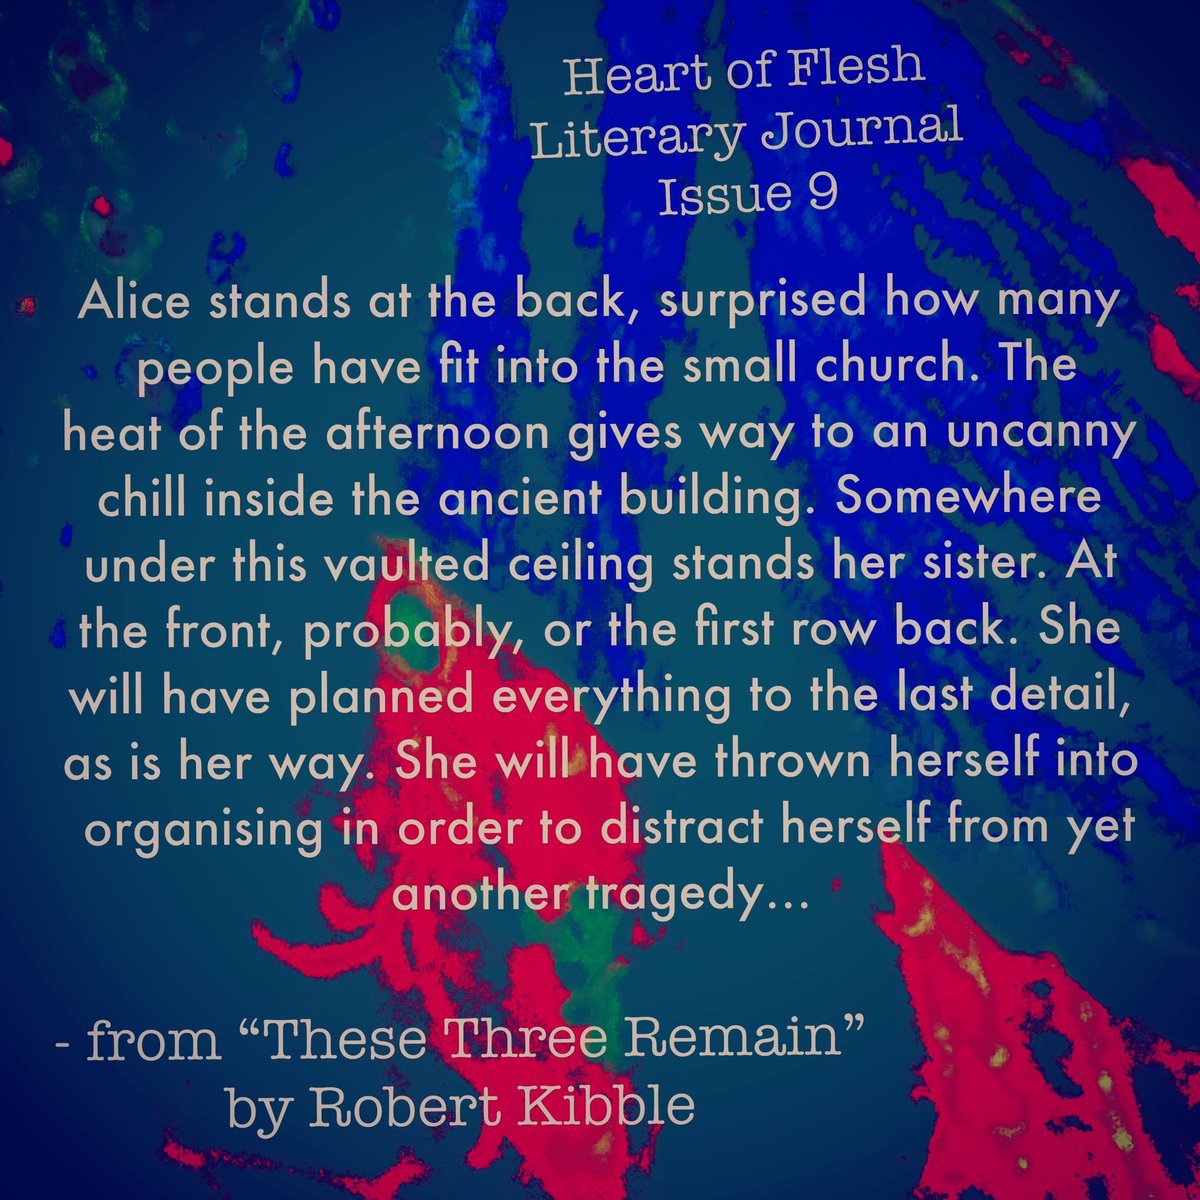 From the short story “These Three Remain” by Robert Kibble, in Issue Nine.

Read the story here: heartoffleshlit.com/issue-nine/rob…

#callsforsubmissions #submissionsopen